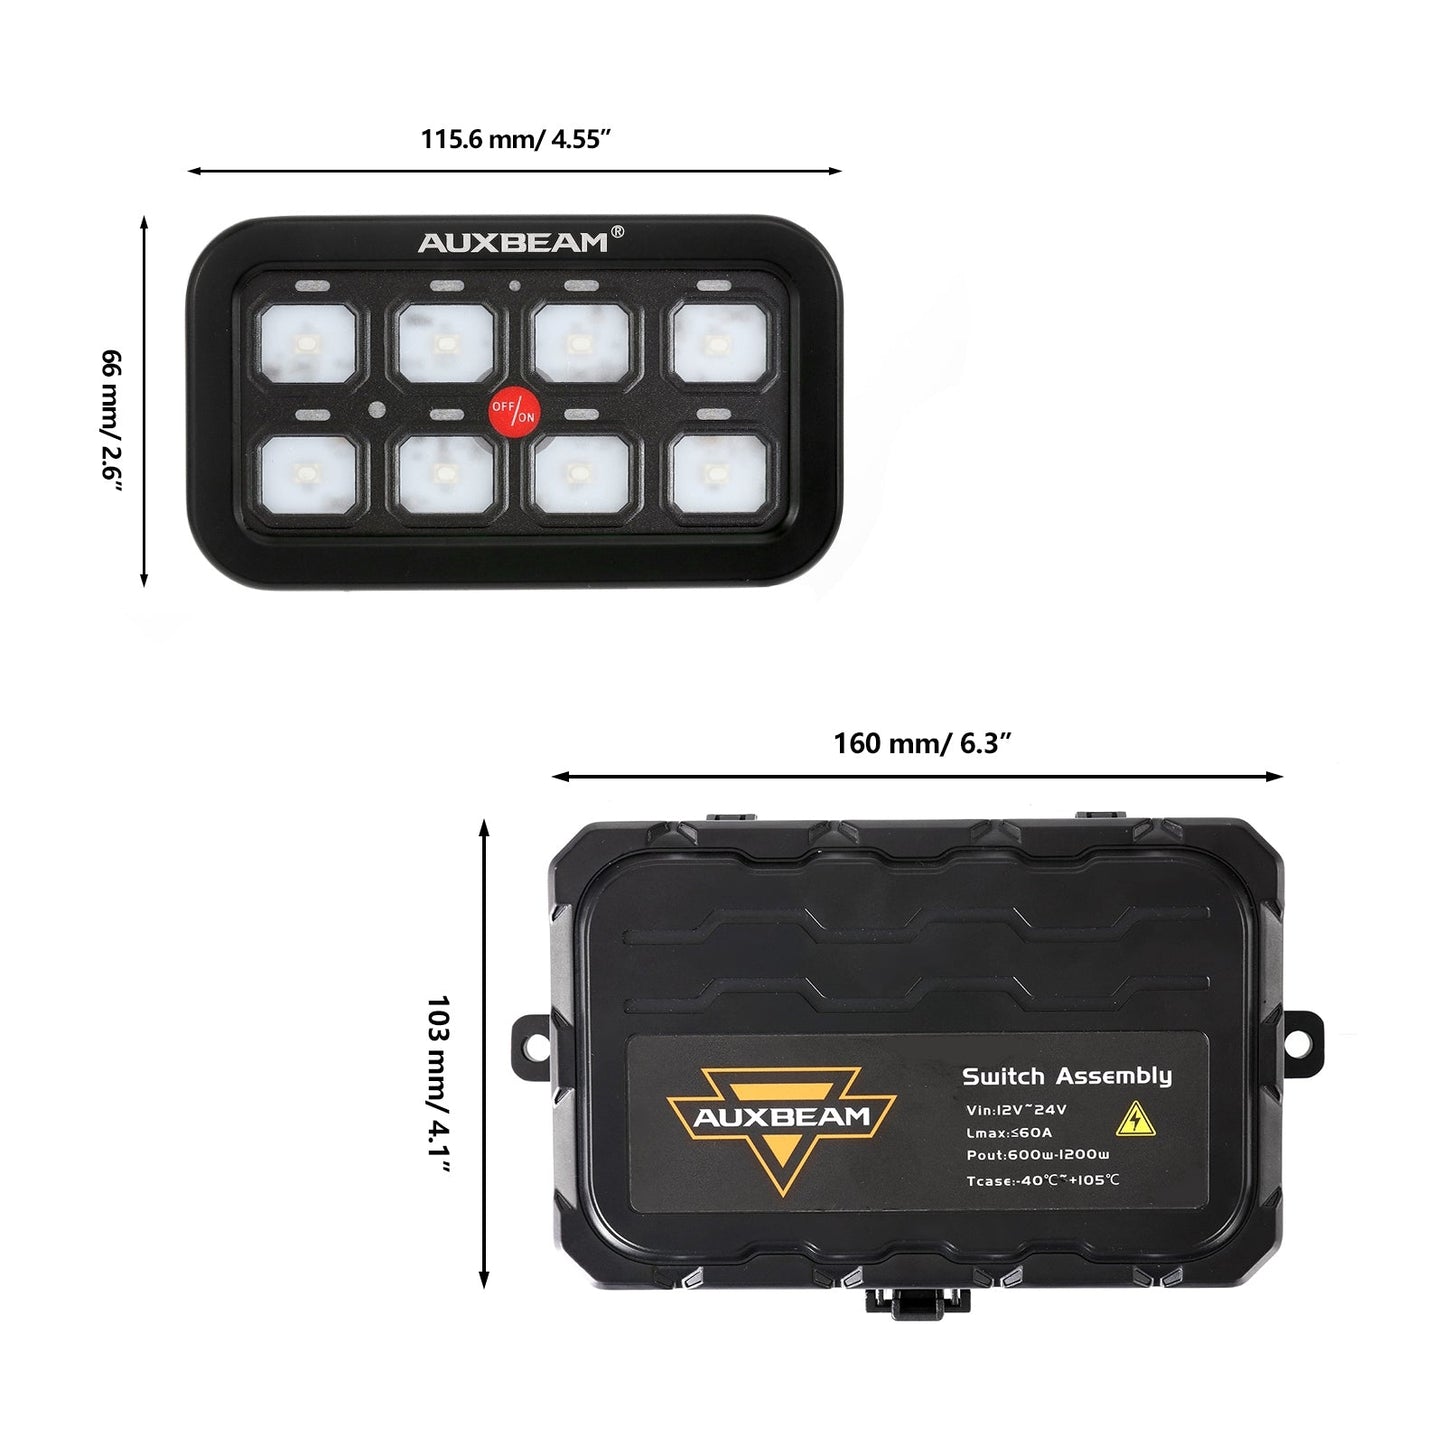 AR-800 RGB Switch Panel with APP+32 Inch 5D-PRO LED Light Bar, Toggle/ Momentary/ Pulsed Mode Supported